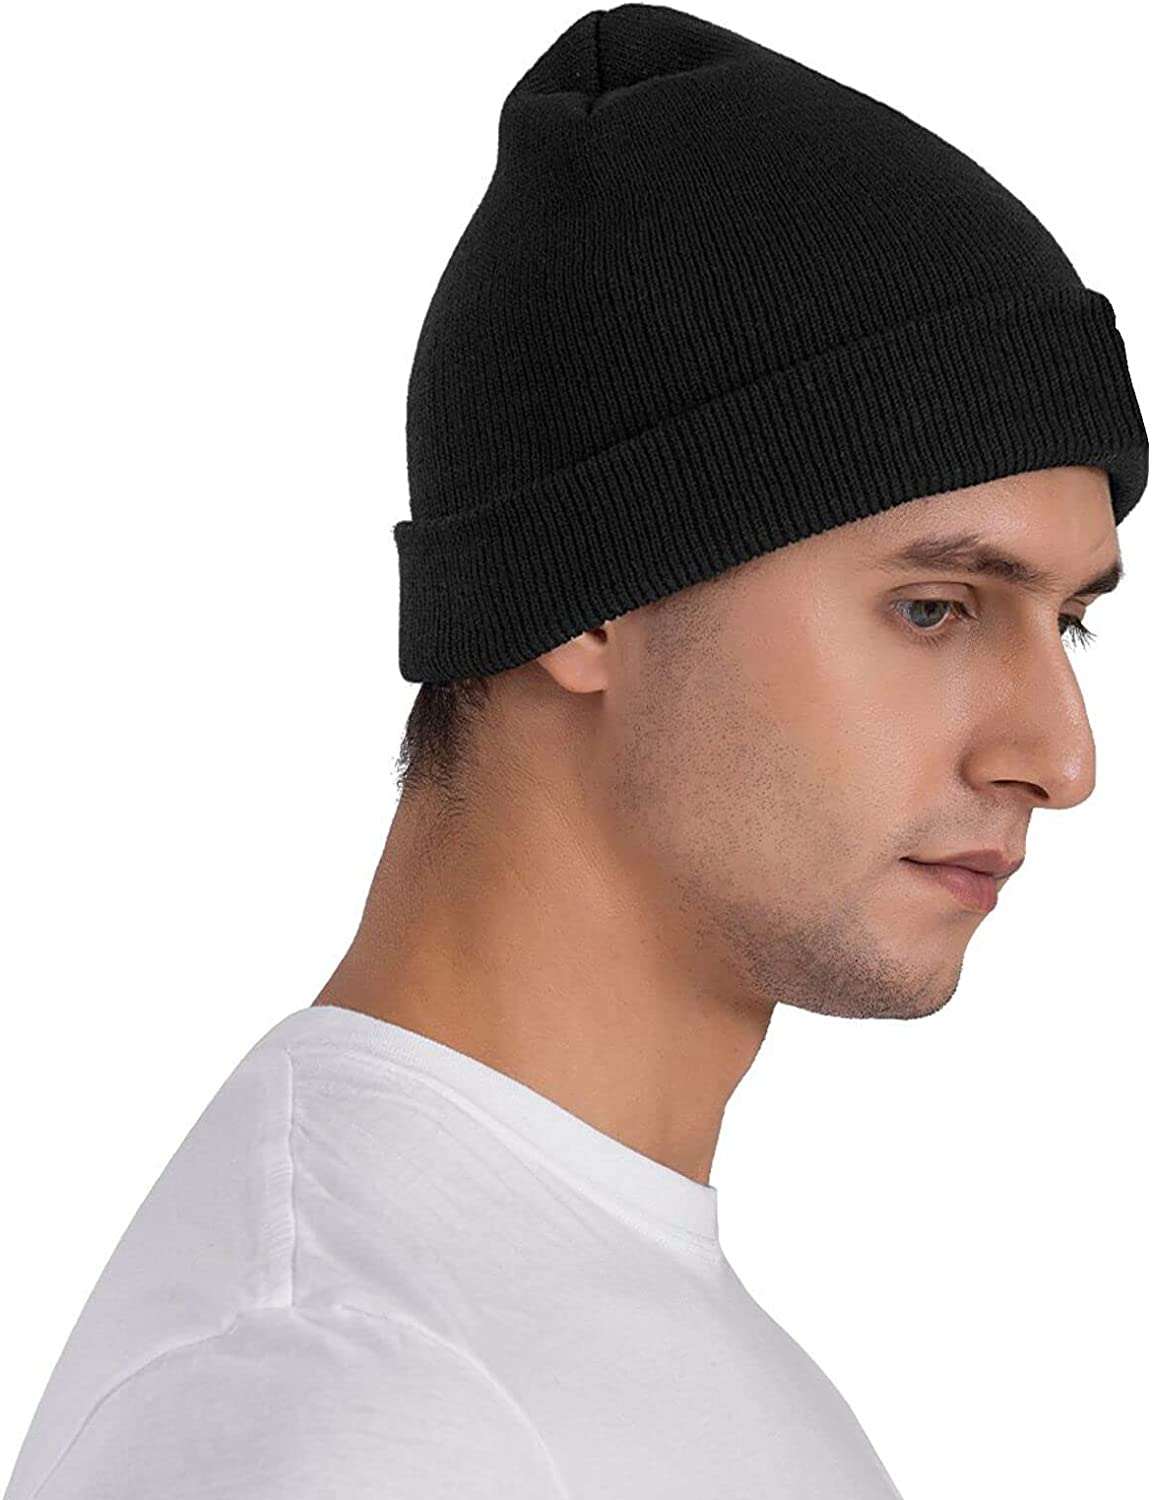 gogoherhome Suicide Logo Boys Cold Weather Men Beanie for Soft Hats Black Women for Warm Knit Toboggan Embroidered Cap Stretchy